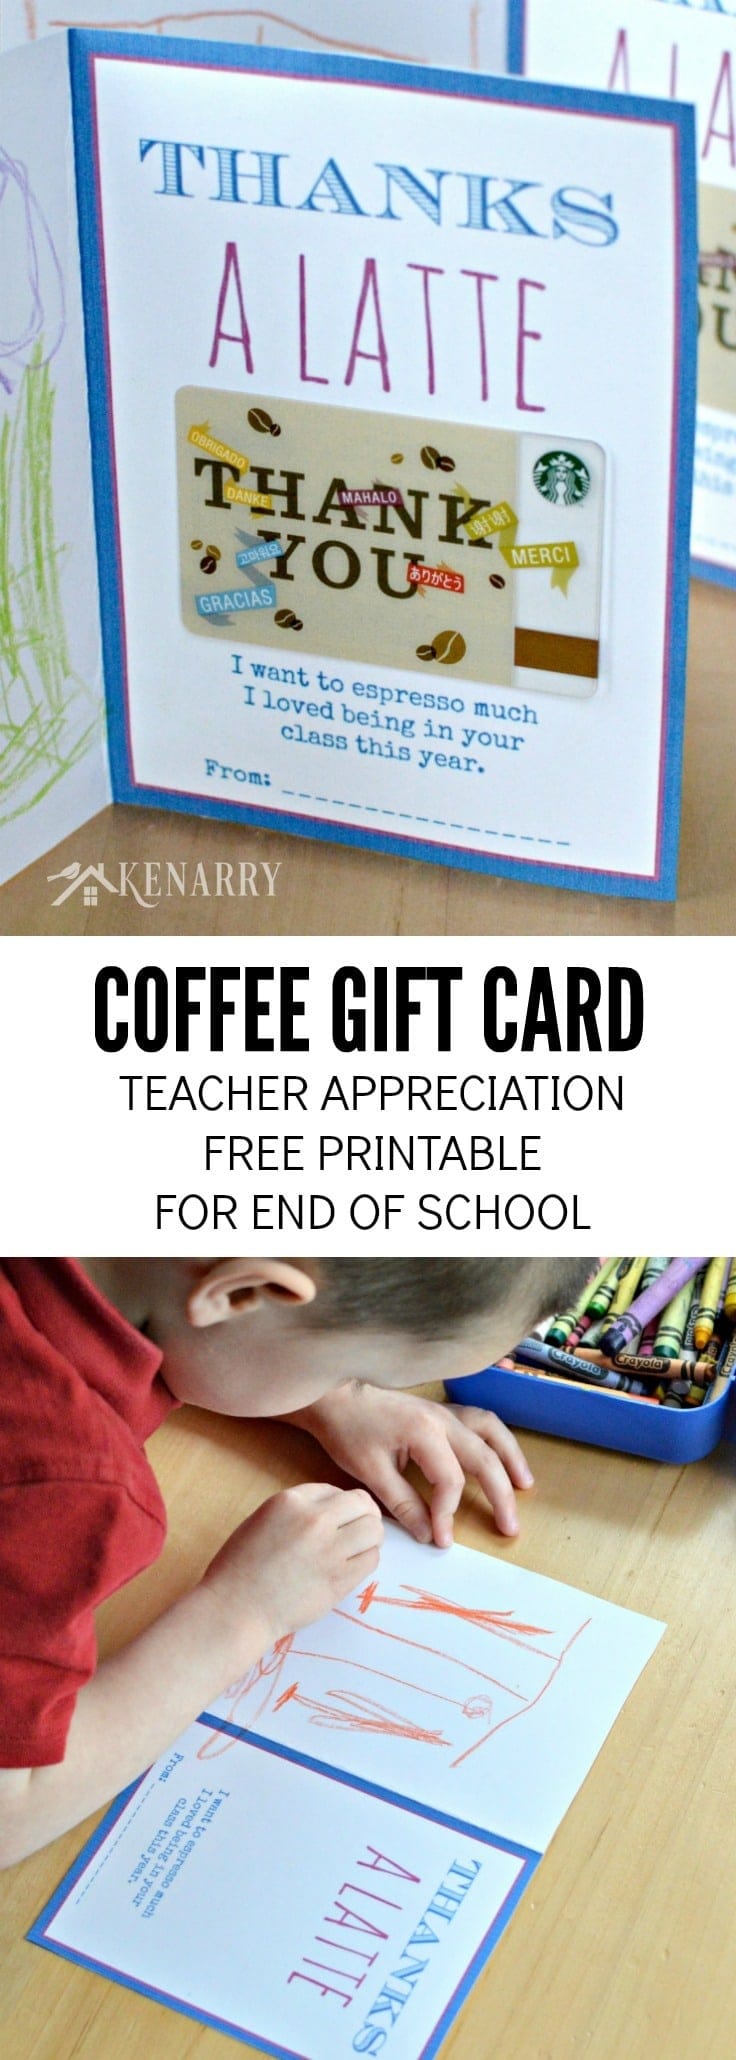 Free Printable Teacher Appreciation Card for the End of School. Attach a coffee gift card and have your child decorate to say "thank a latte" for a great year! - Kenarry.com